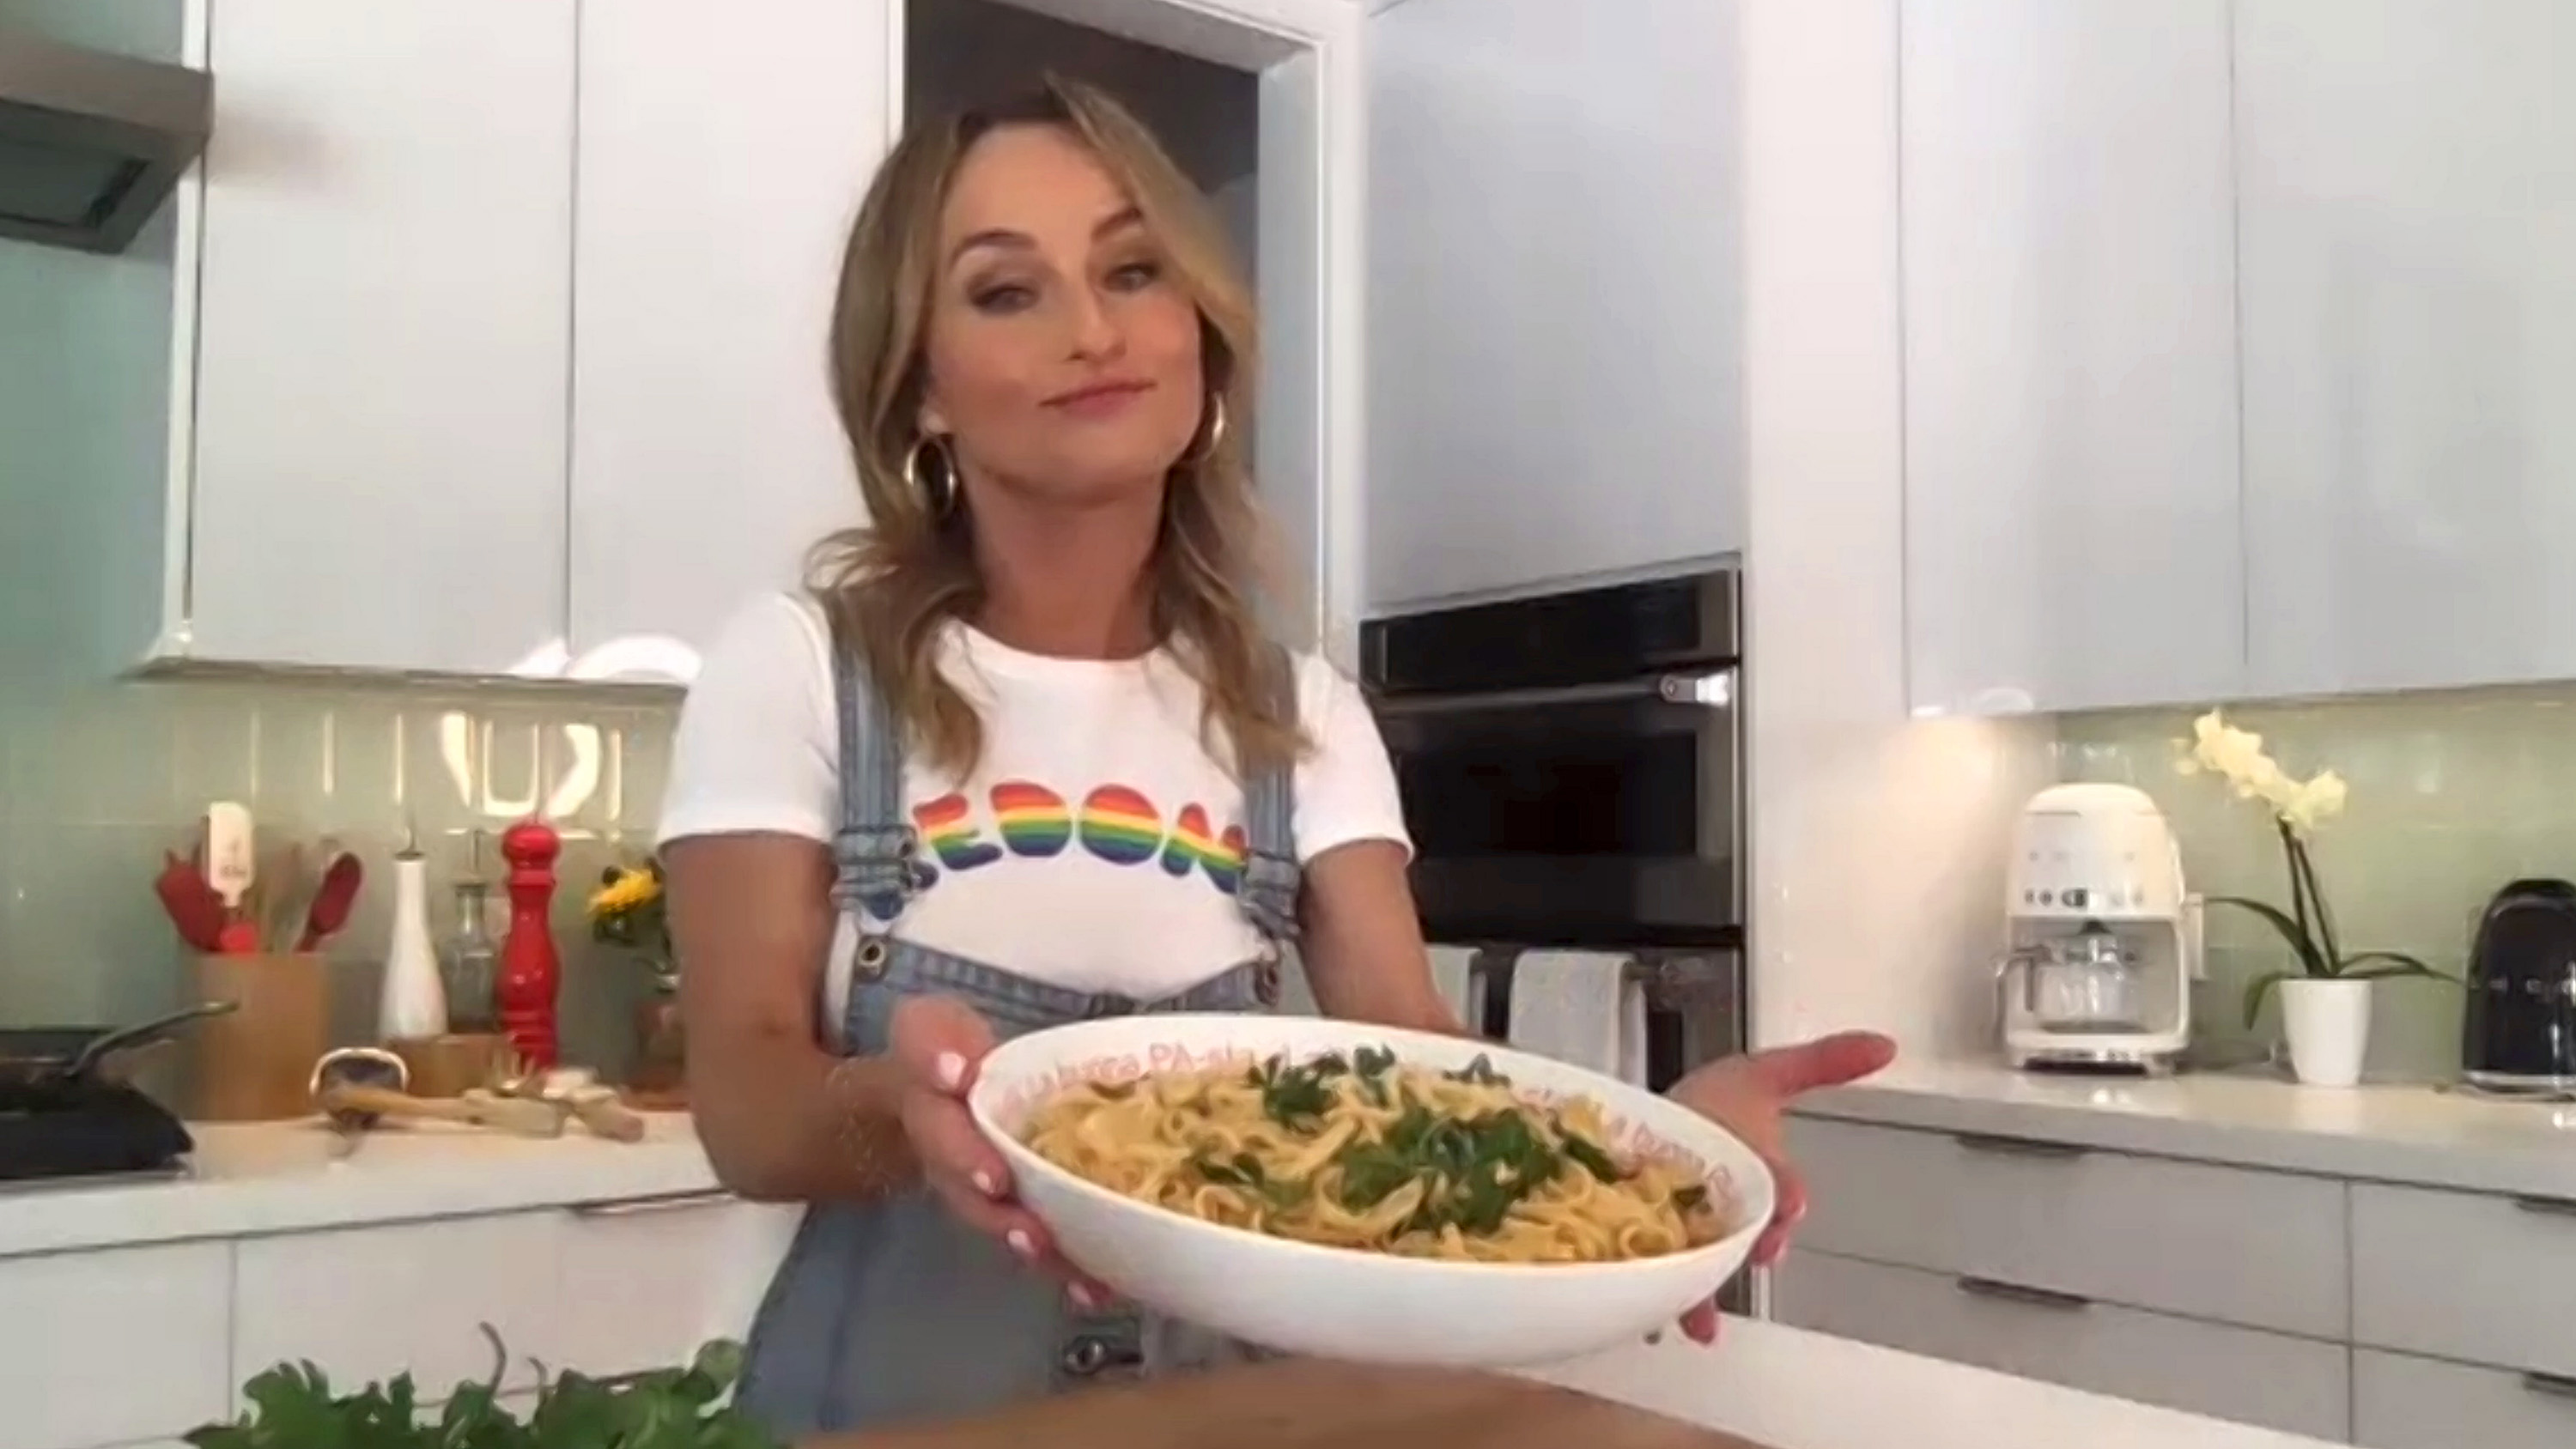 Giada De Laurentiis wears denim coveralls as she holds a bowl of pasta in this photograph.